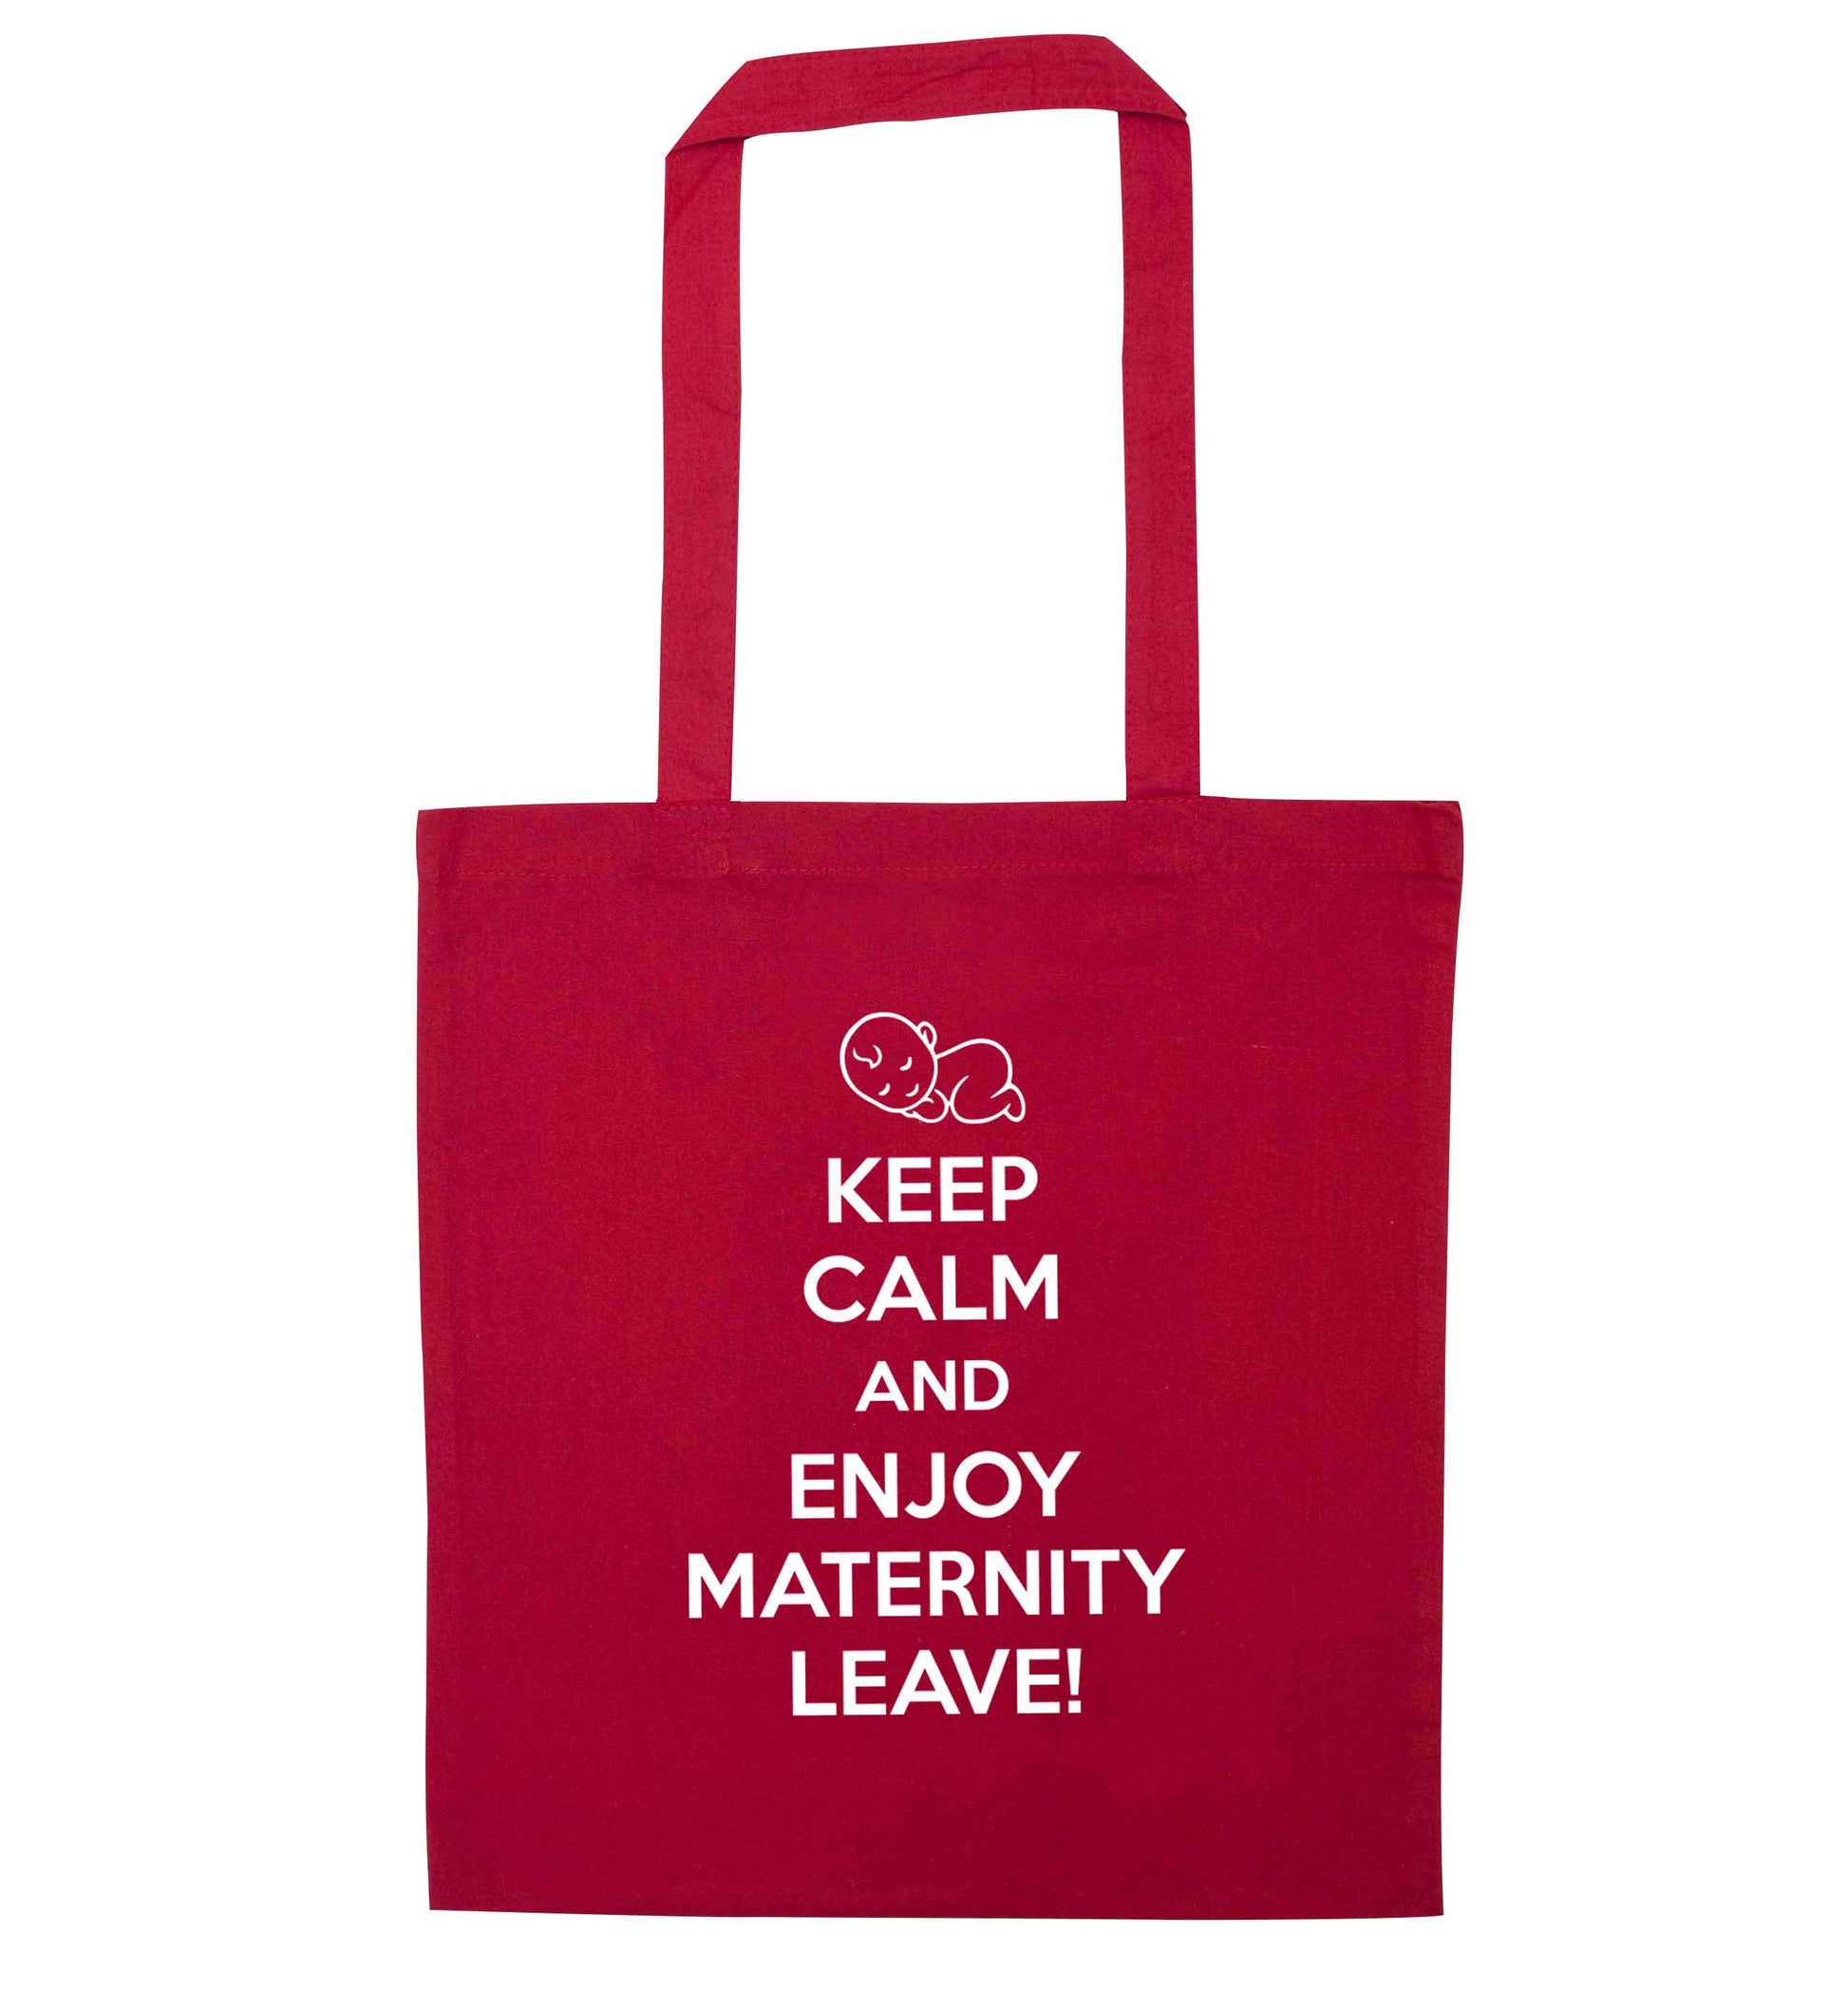 Keep calm and enjoy maternity leave red tote bag